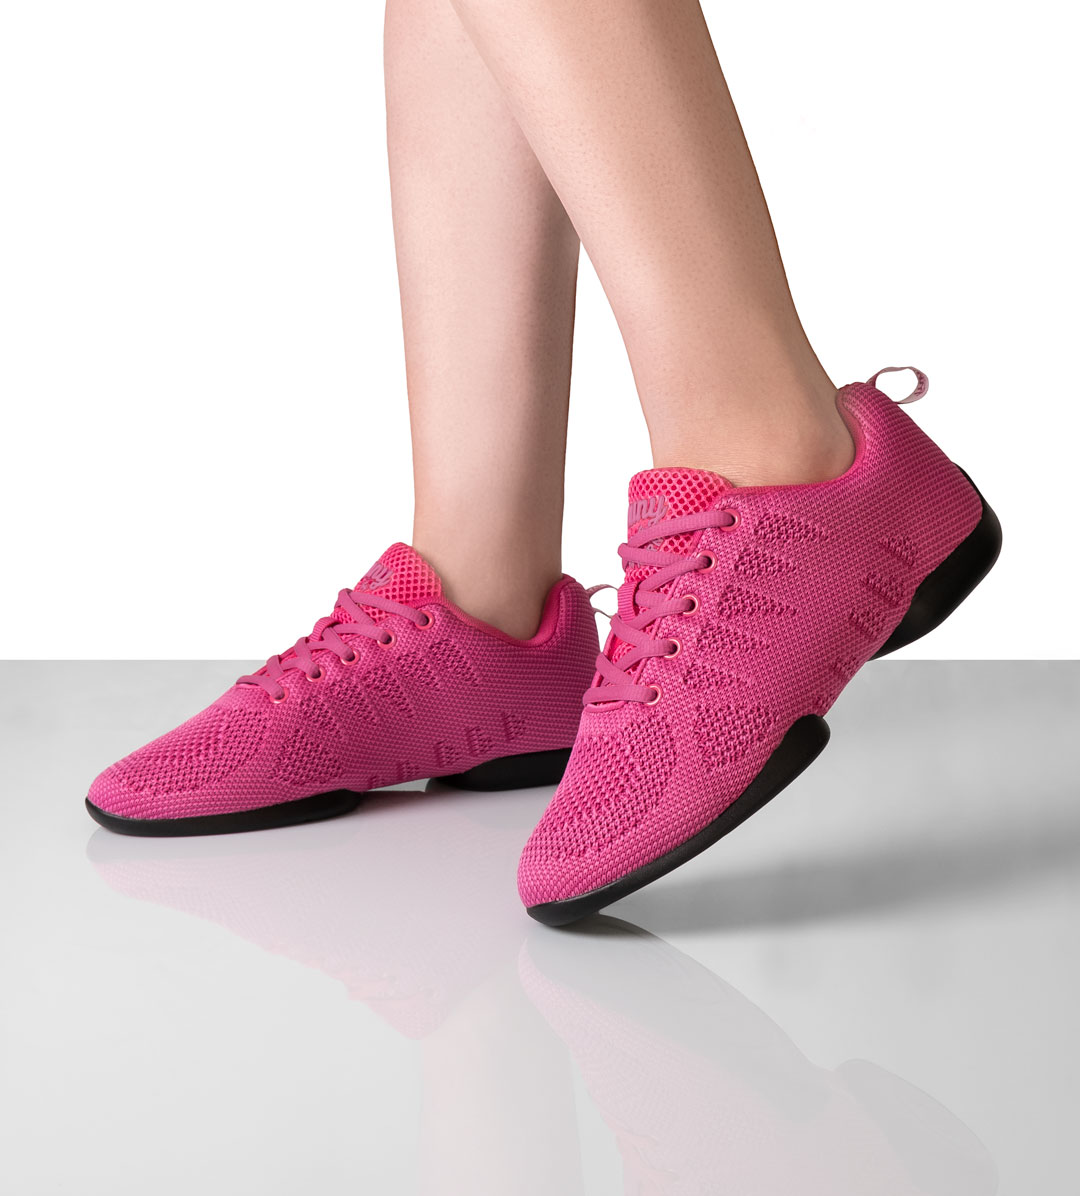 Women's dance sneaker 165 in Fuchsia by Suny by Anna Kern, made of fine knitting material with split sole, ideal for dancing on all floors.